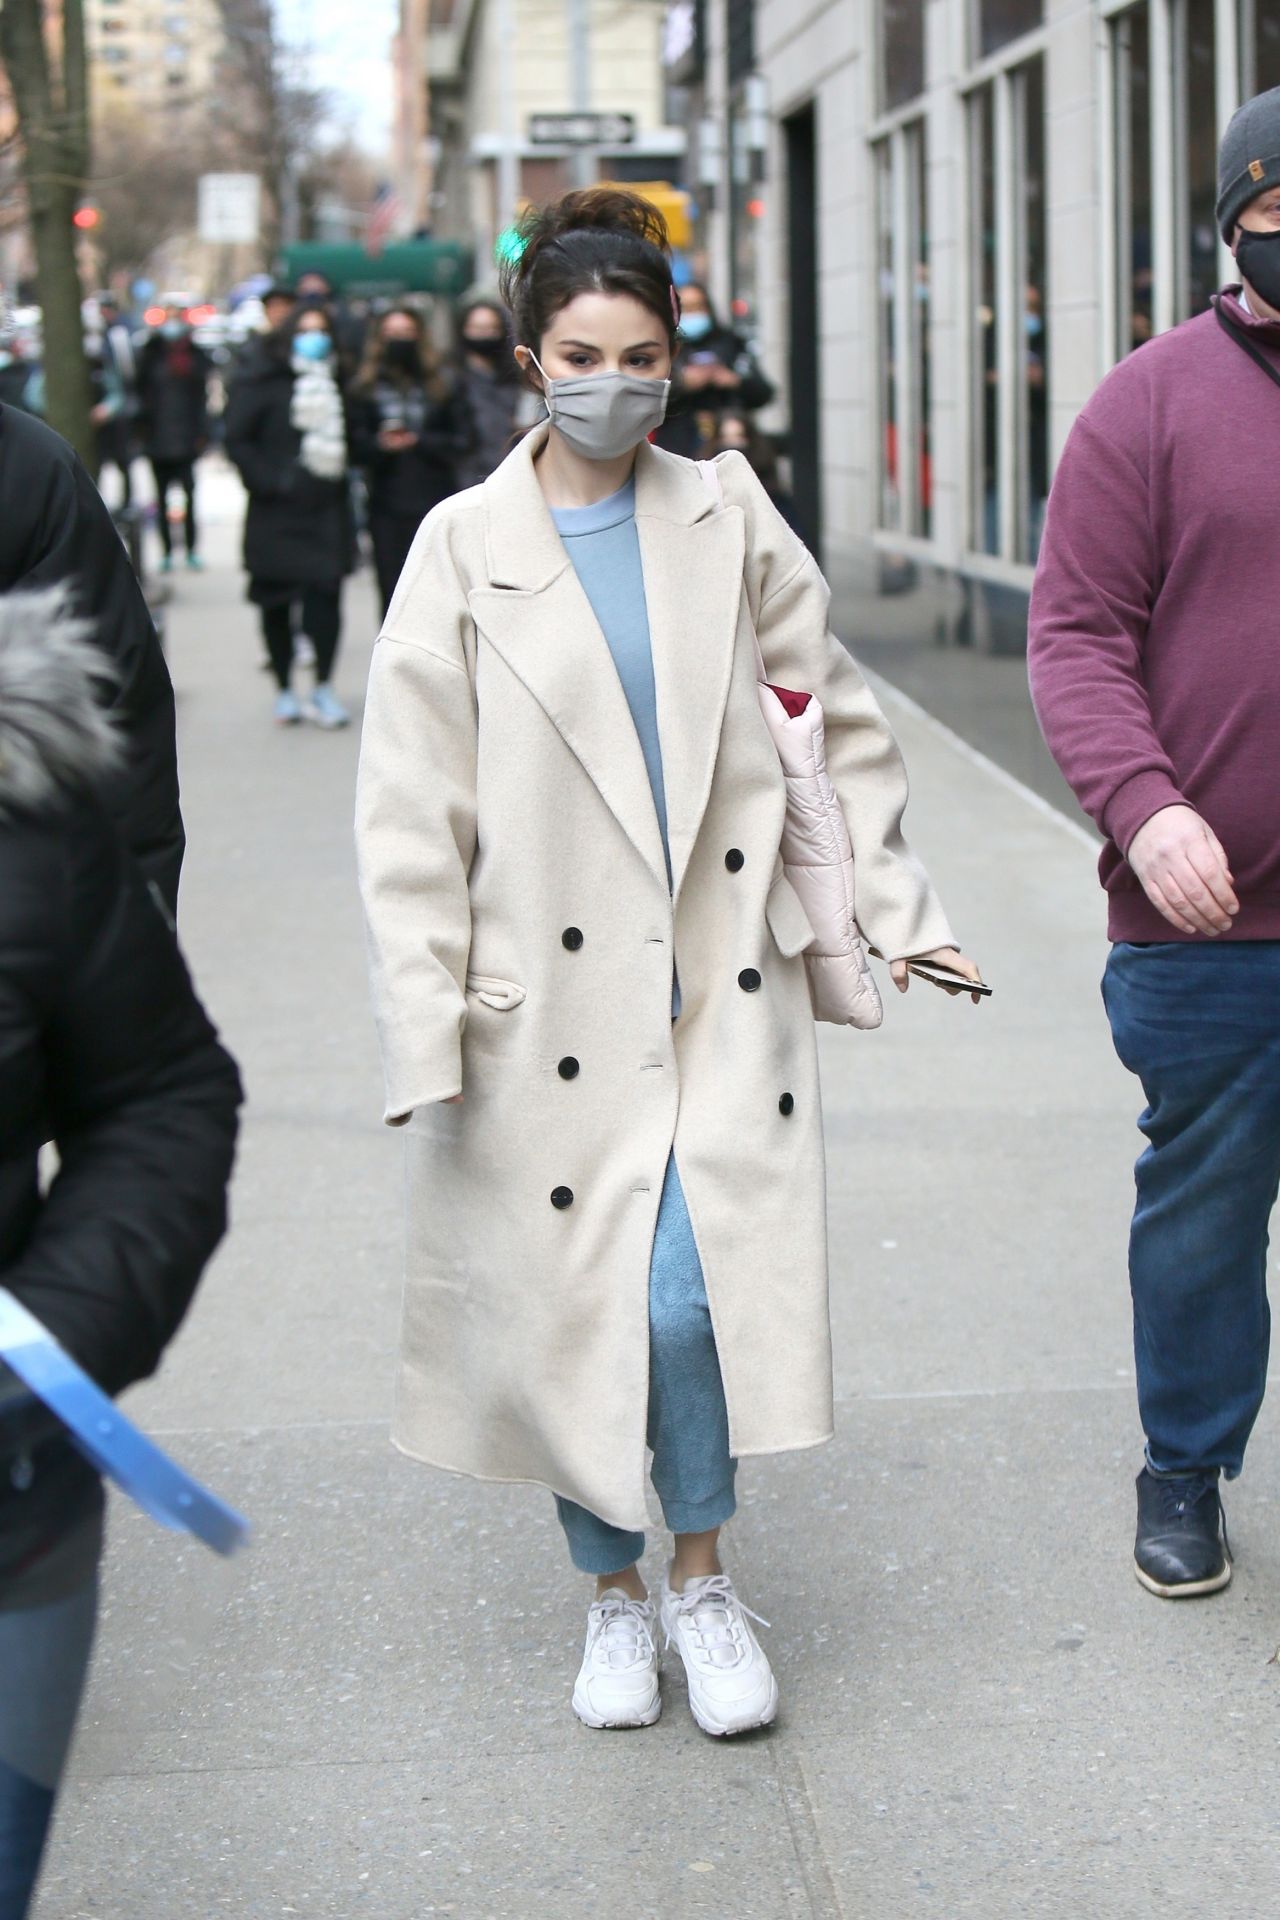 Selena Gomez - "Only Murders in The Building" Set in NYC ...